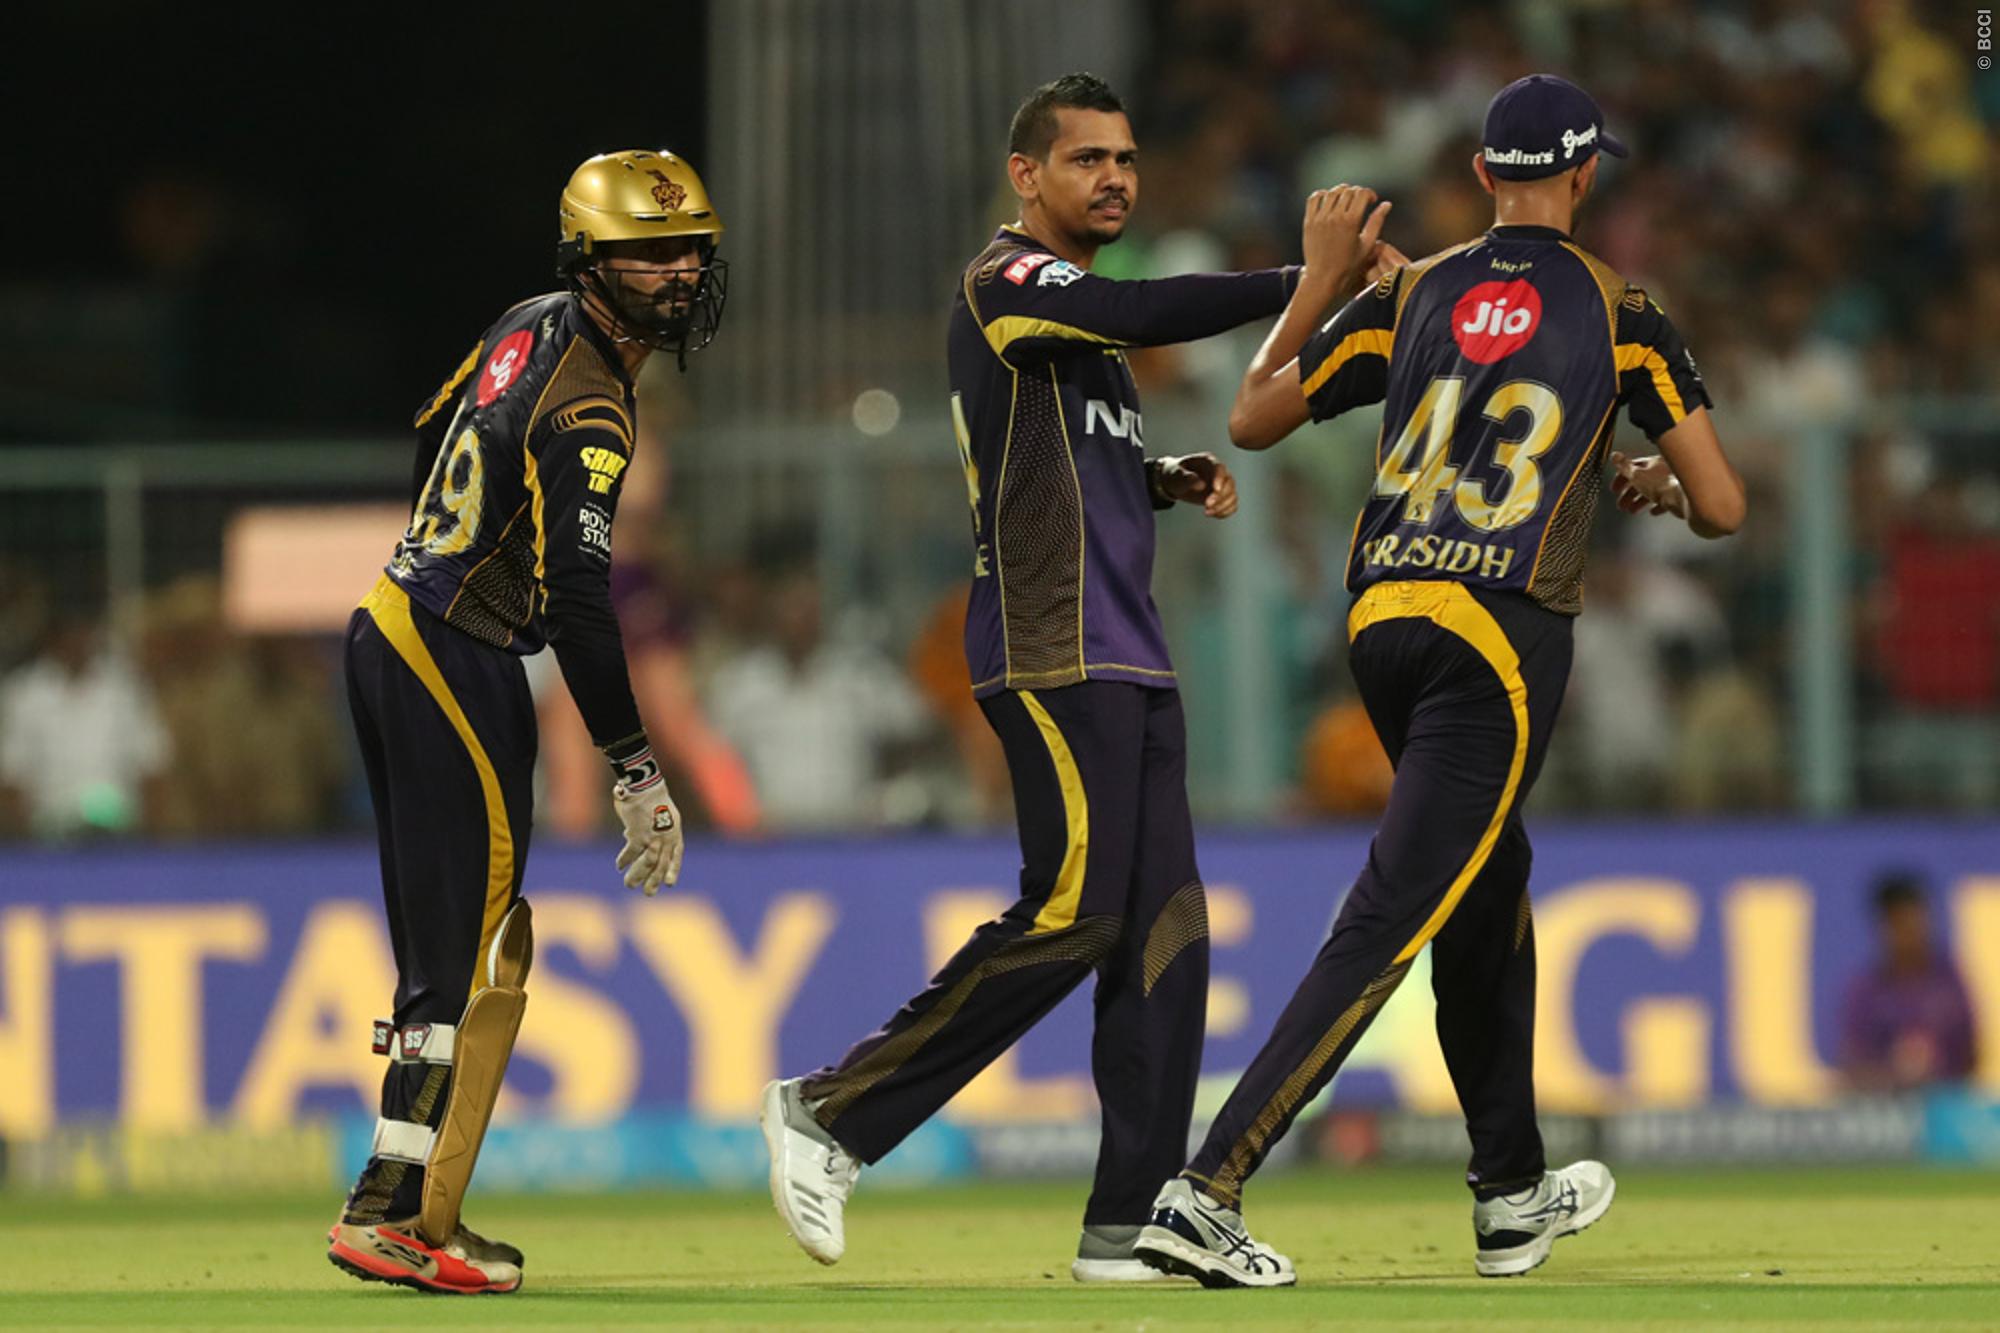 IPL 2020 | Sunil Narine will be most difficult for others to play and handle, opines David Hussey